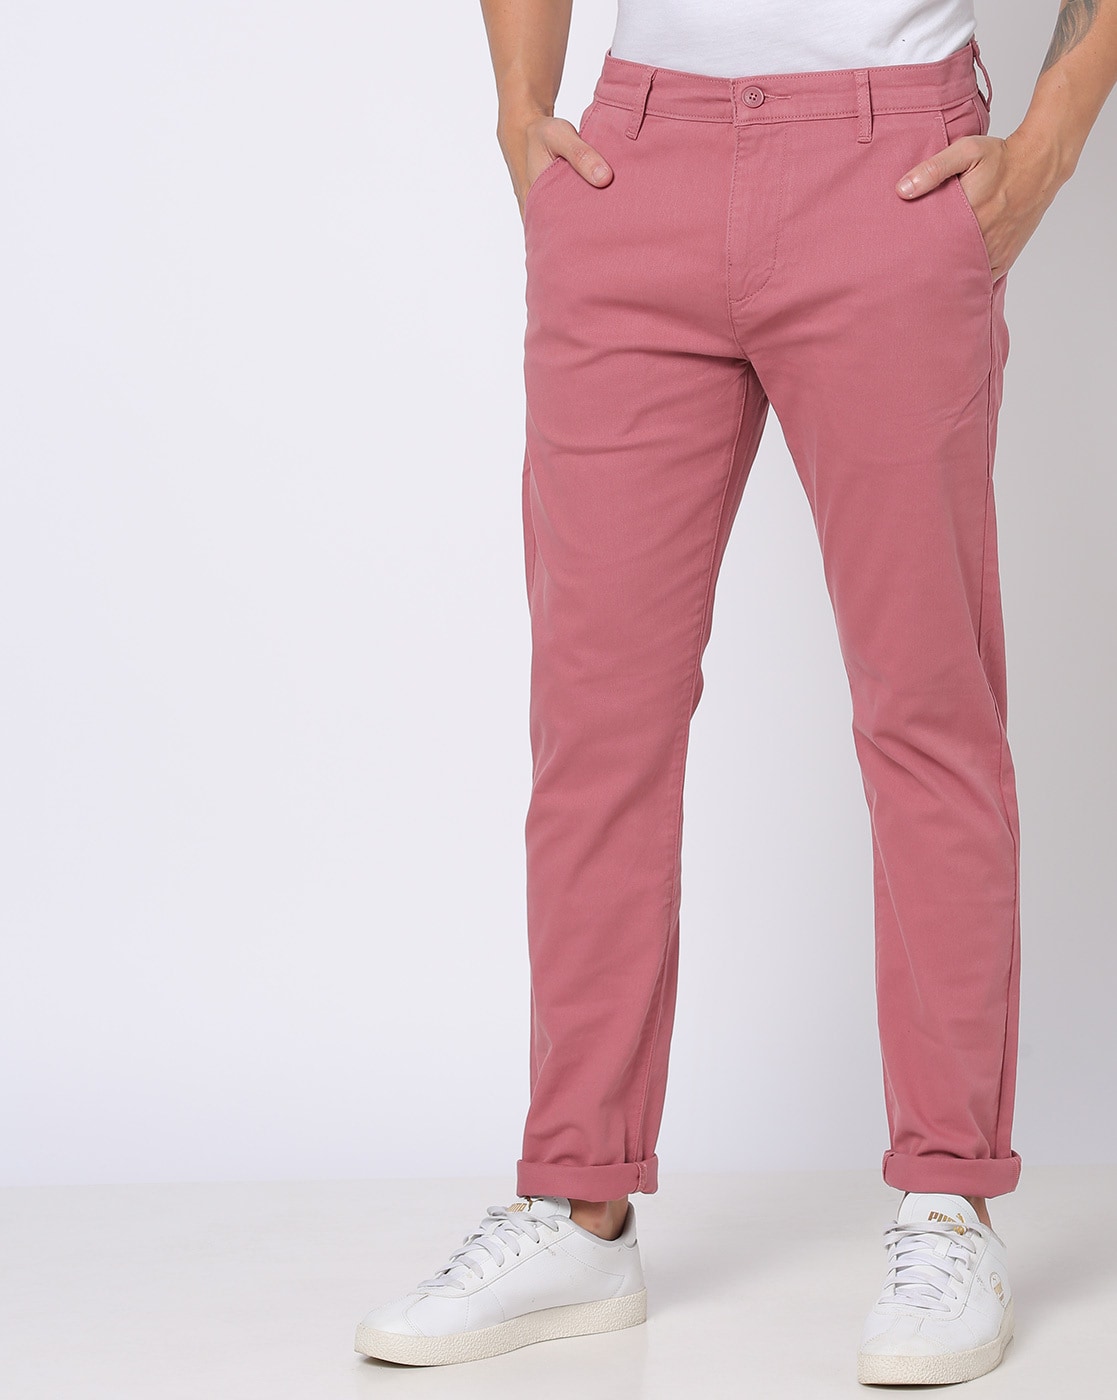 An Everyday Classic Onion Pink Stretch Men Chinos  Mark Morphy